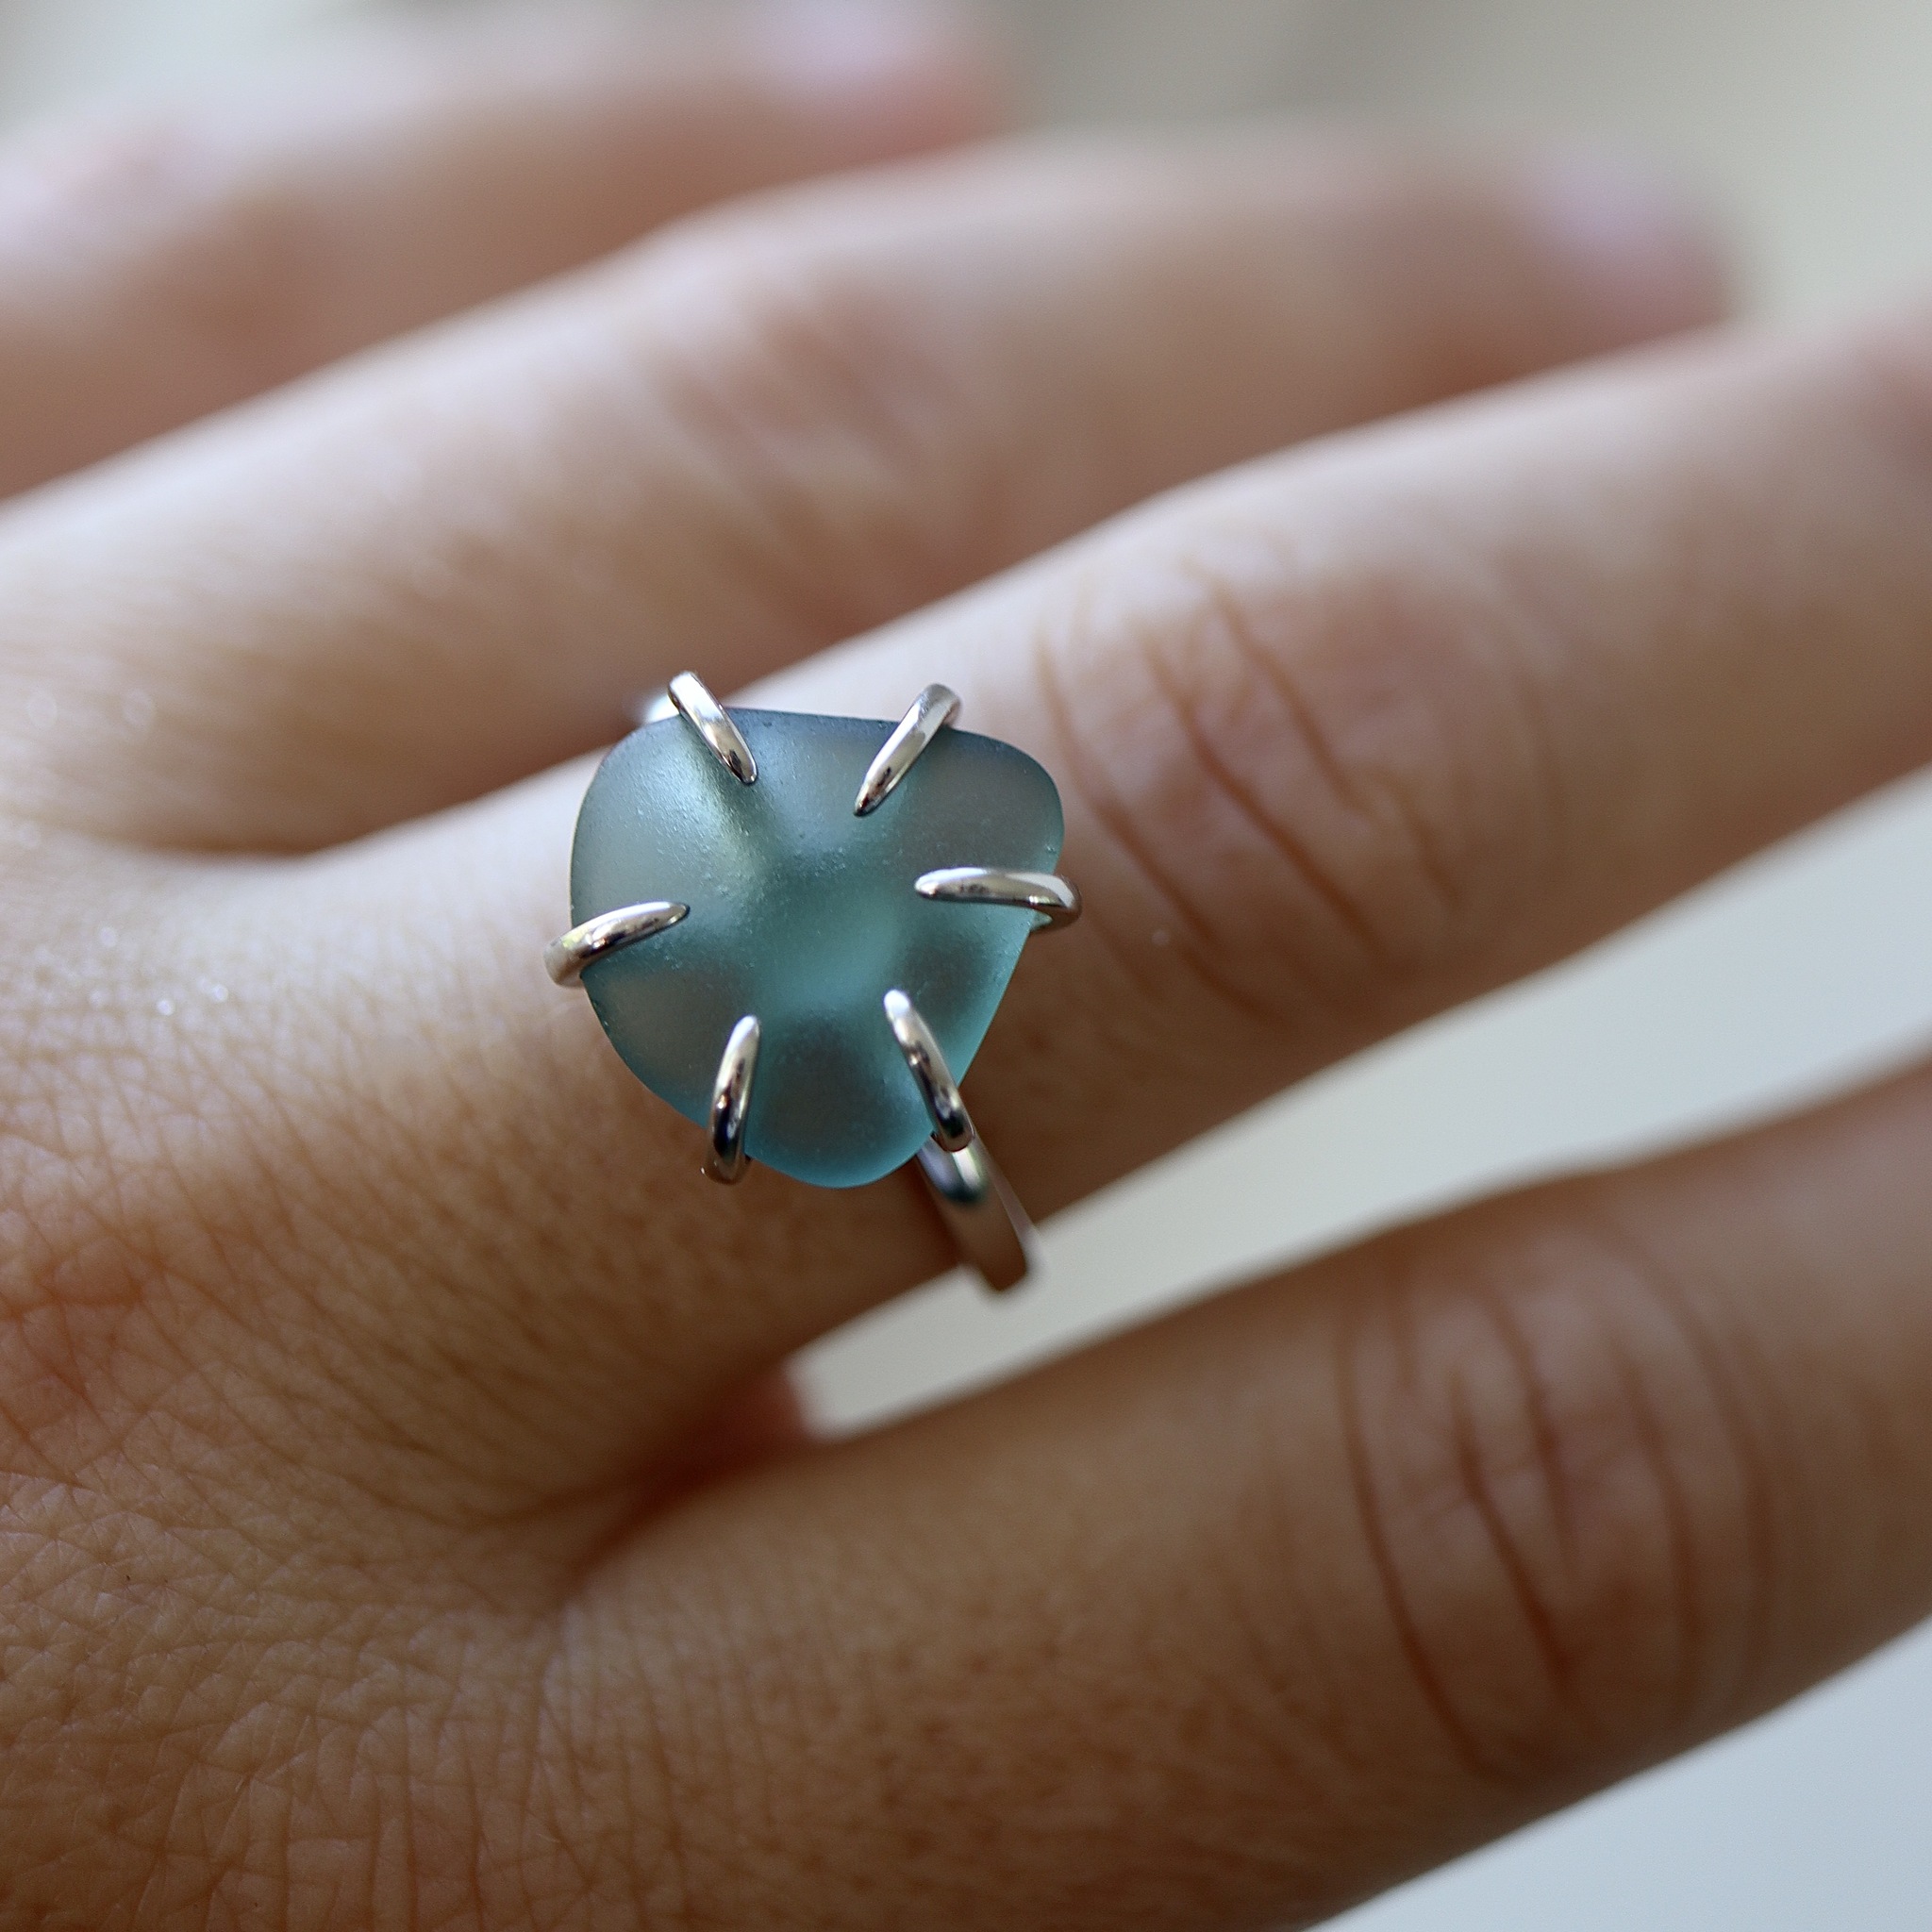 The Sea In Me ring